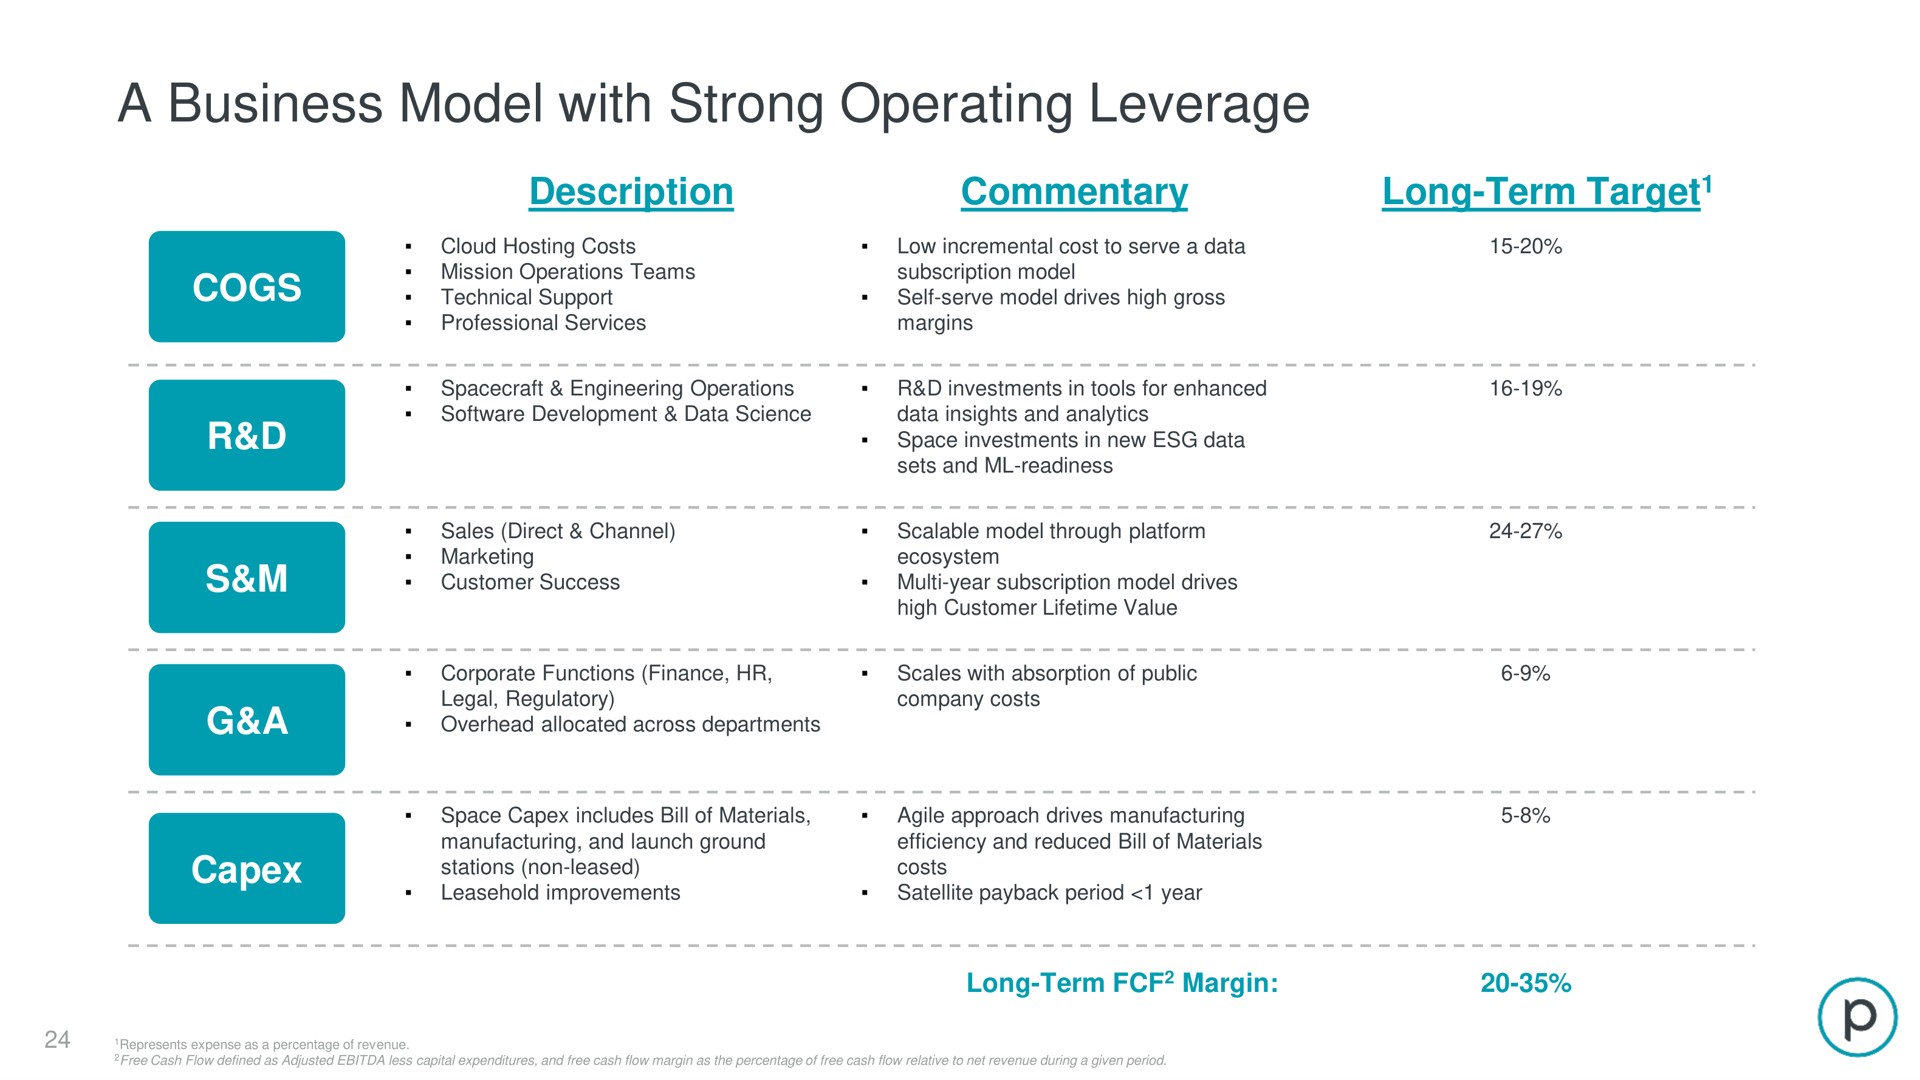 a business model with strong operating leverage | Planet